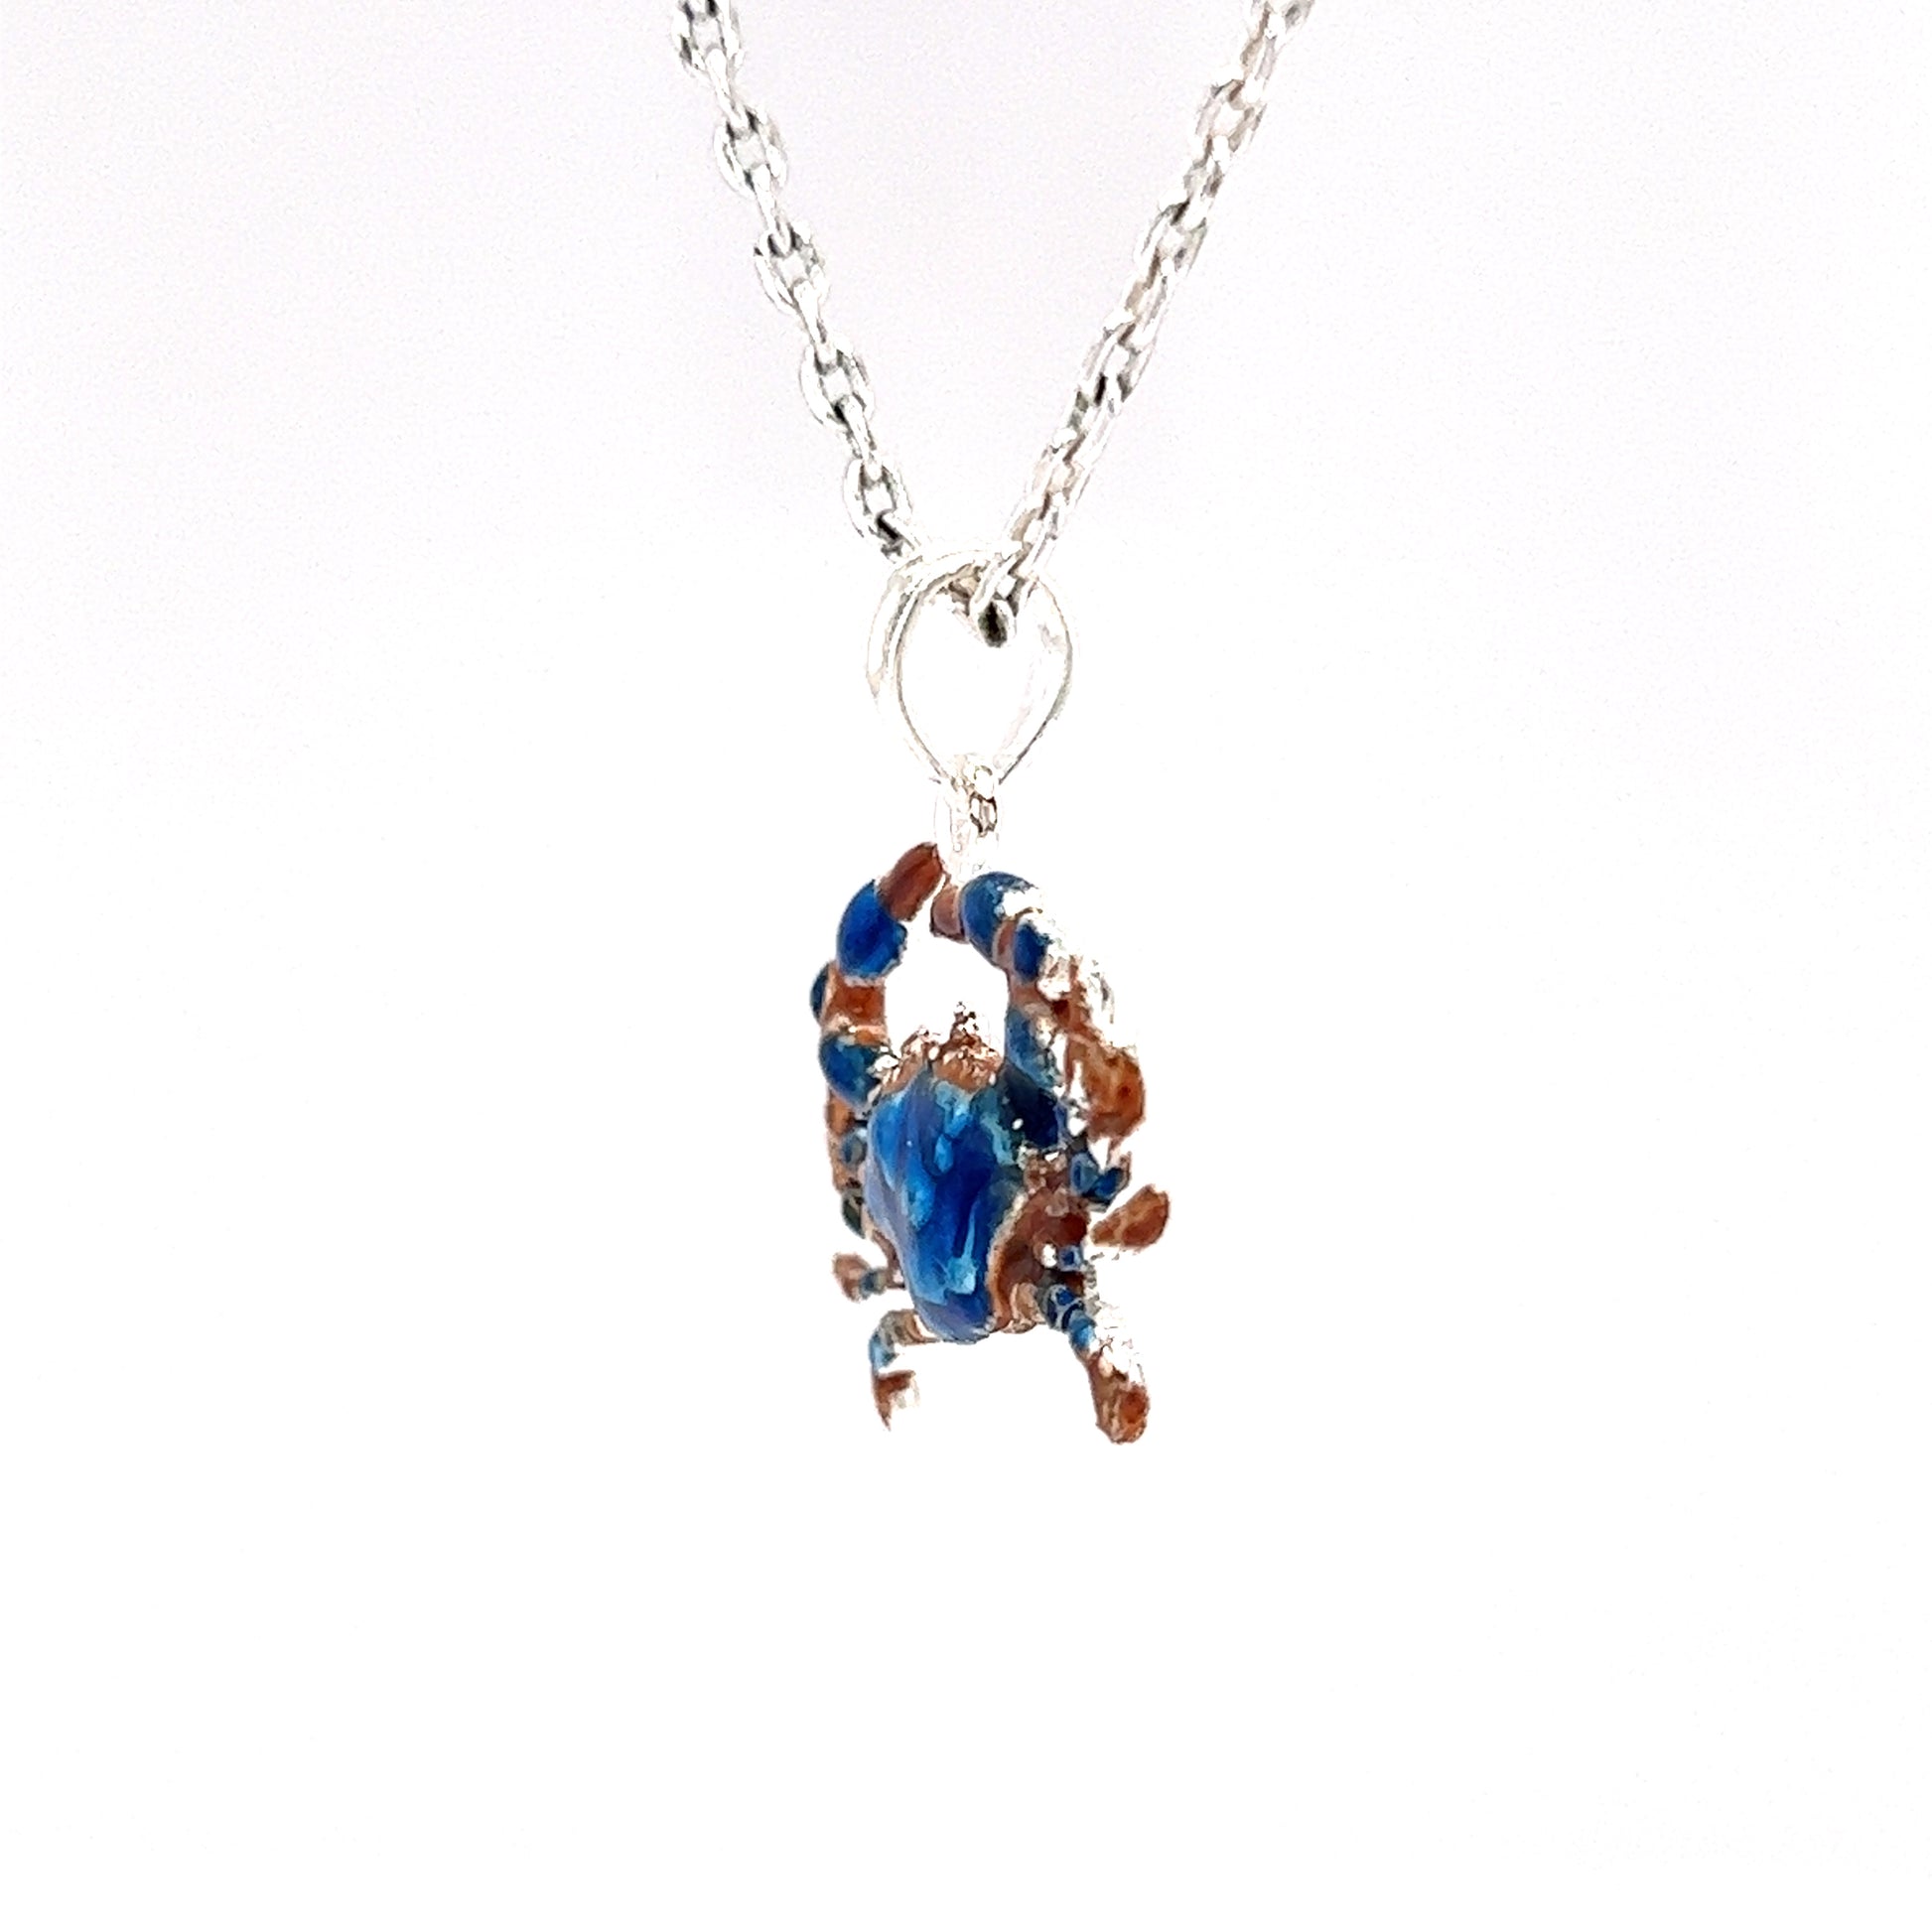 Blue Crab Small Pendant with Enameling in Sterling Silver Right Side View with Chain